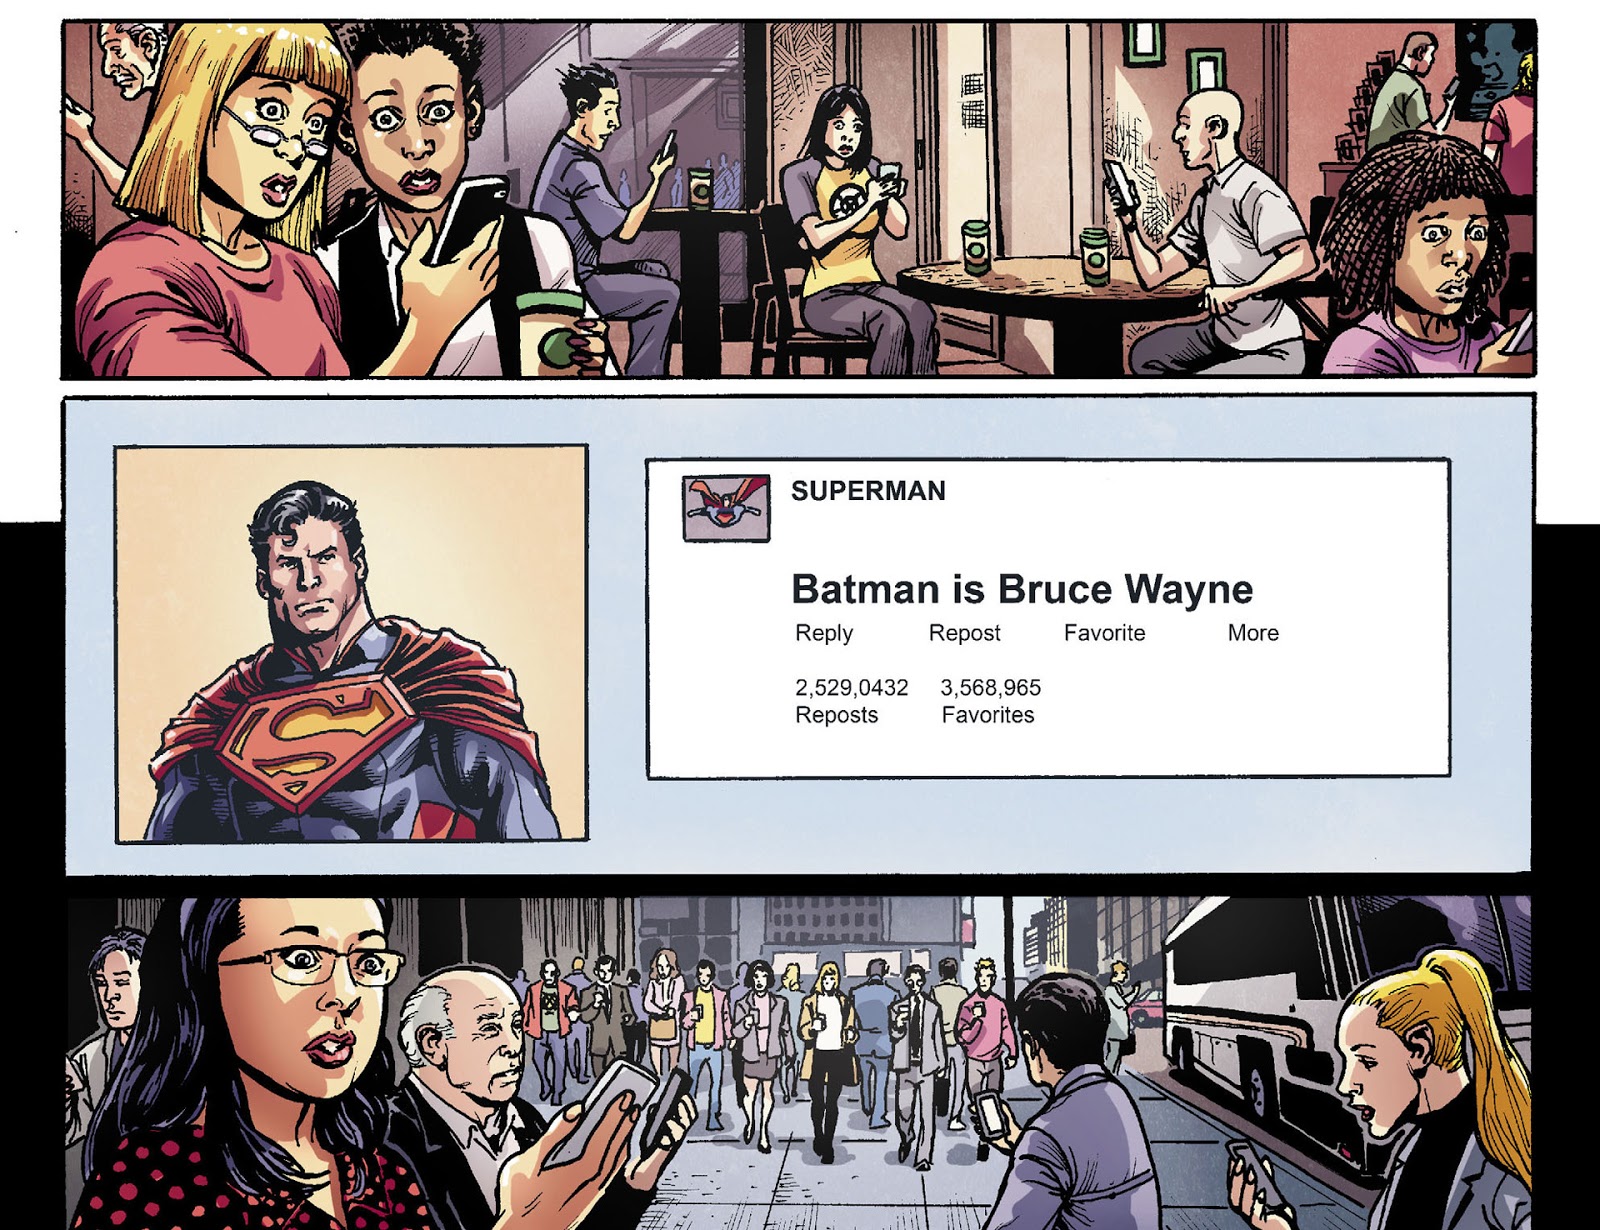 Superman tweets out Batman's secret identity in Injustice: Gods Among Us Vol. 1 #28 "Chapter 28" (2013), DC Comics. Words by Tom Taylor, art by Tom Derenick, Santi Casas, and David Lopez.